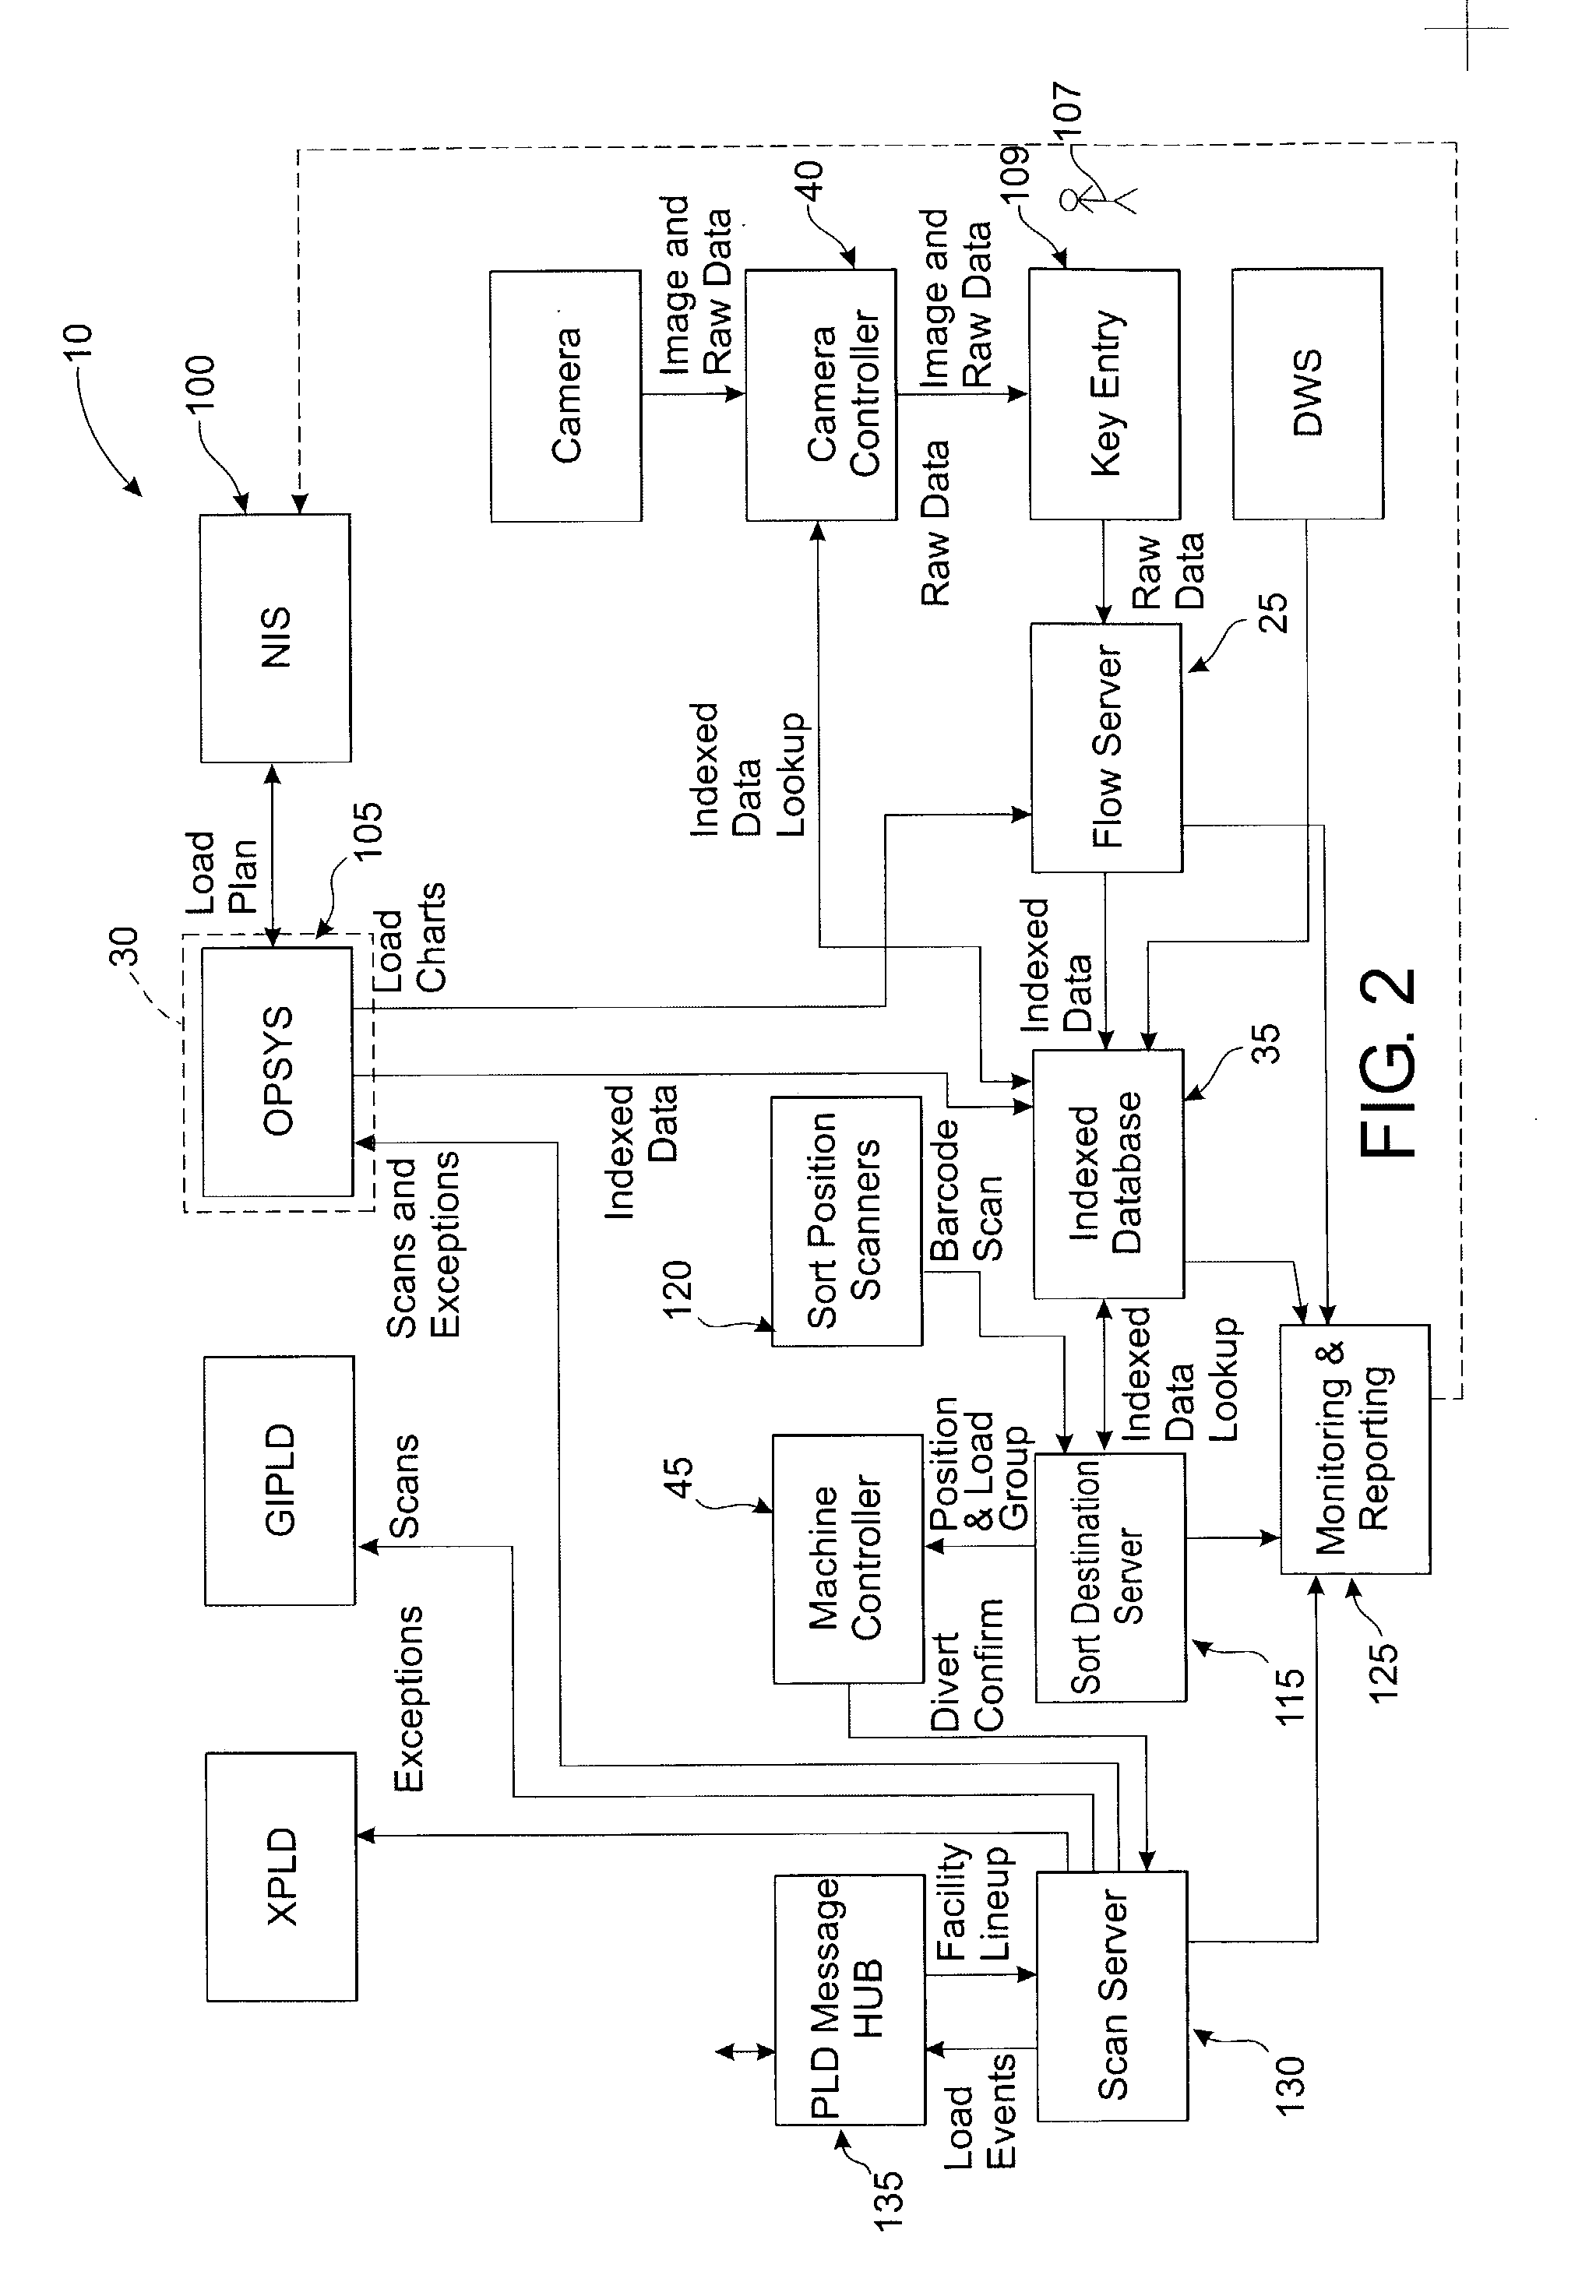 Systems and methods for package sortation and delivery using radio frequency identification technology